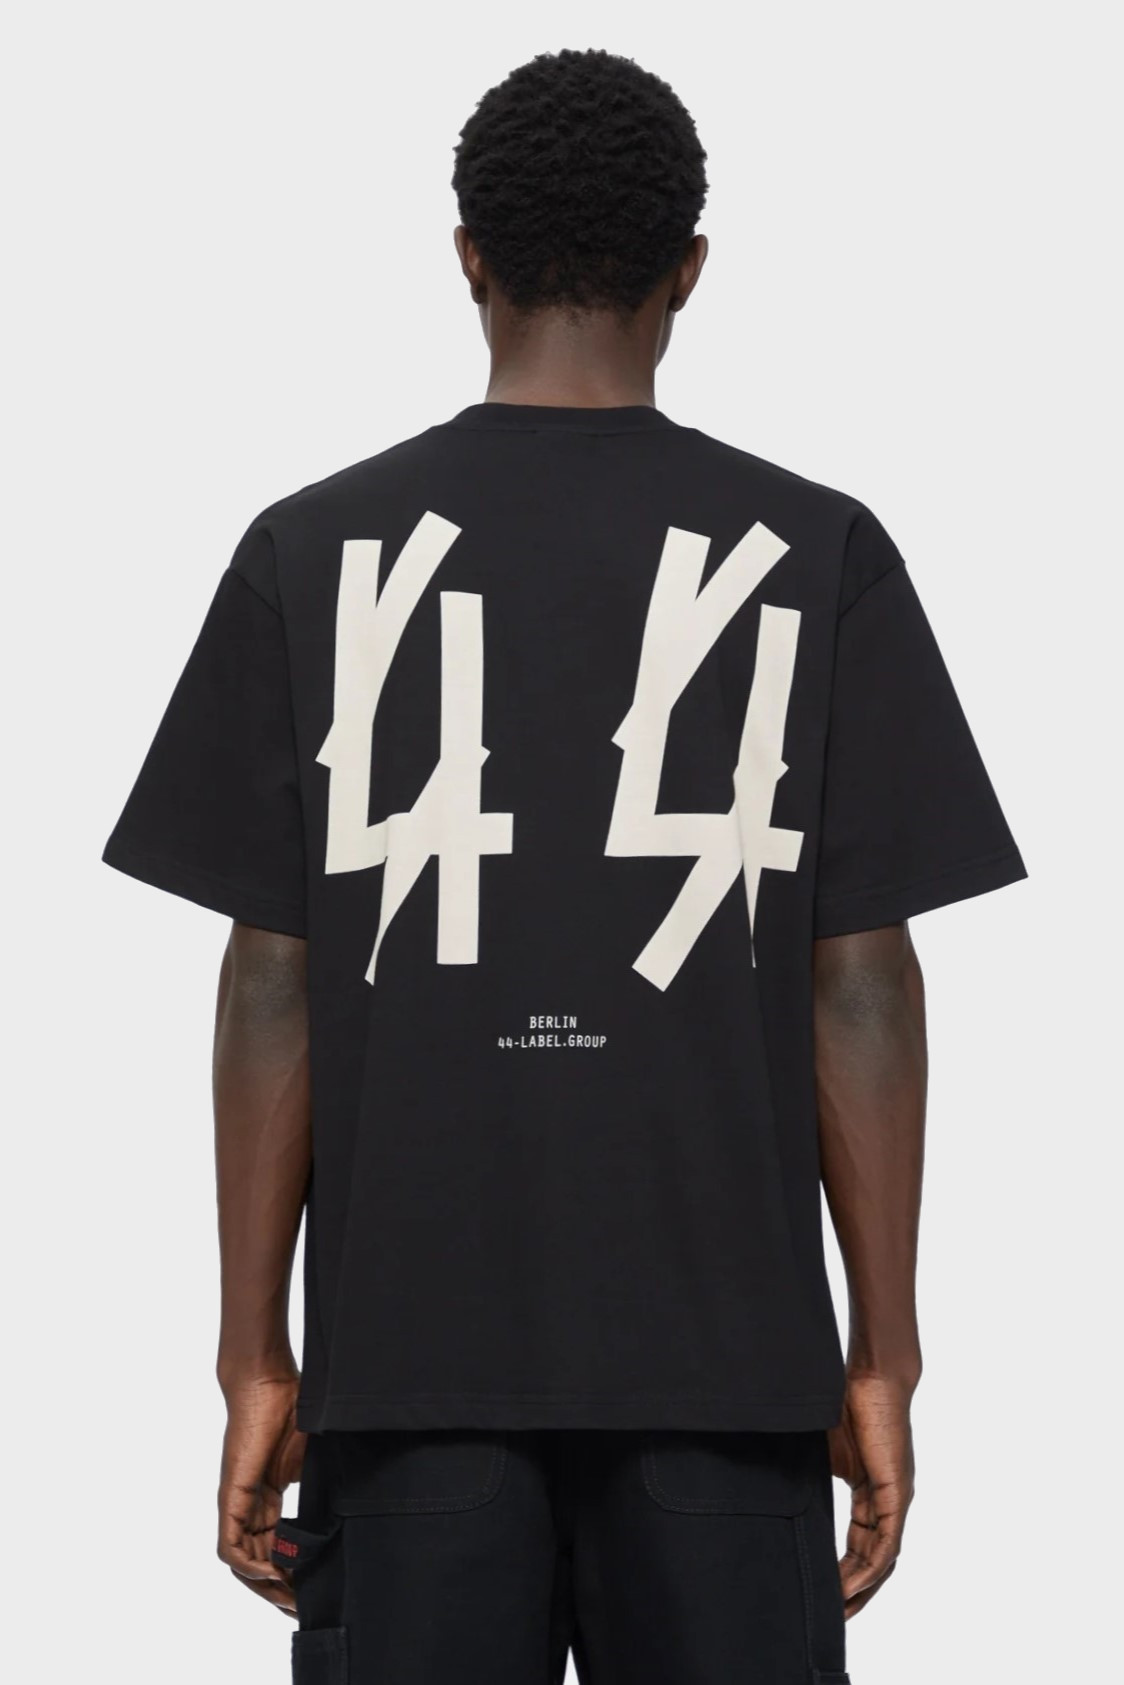 44 LABEL GROUP Classic T in Black/Dirty White S